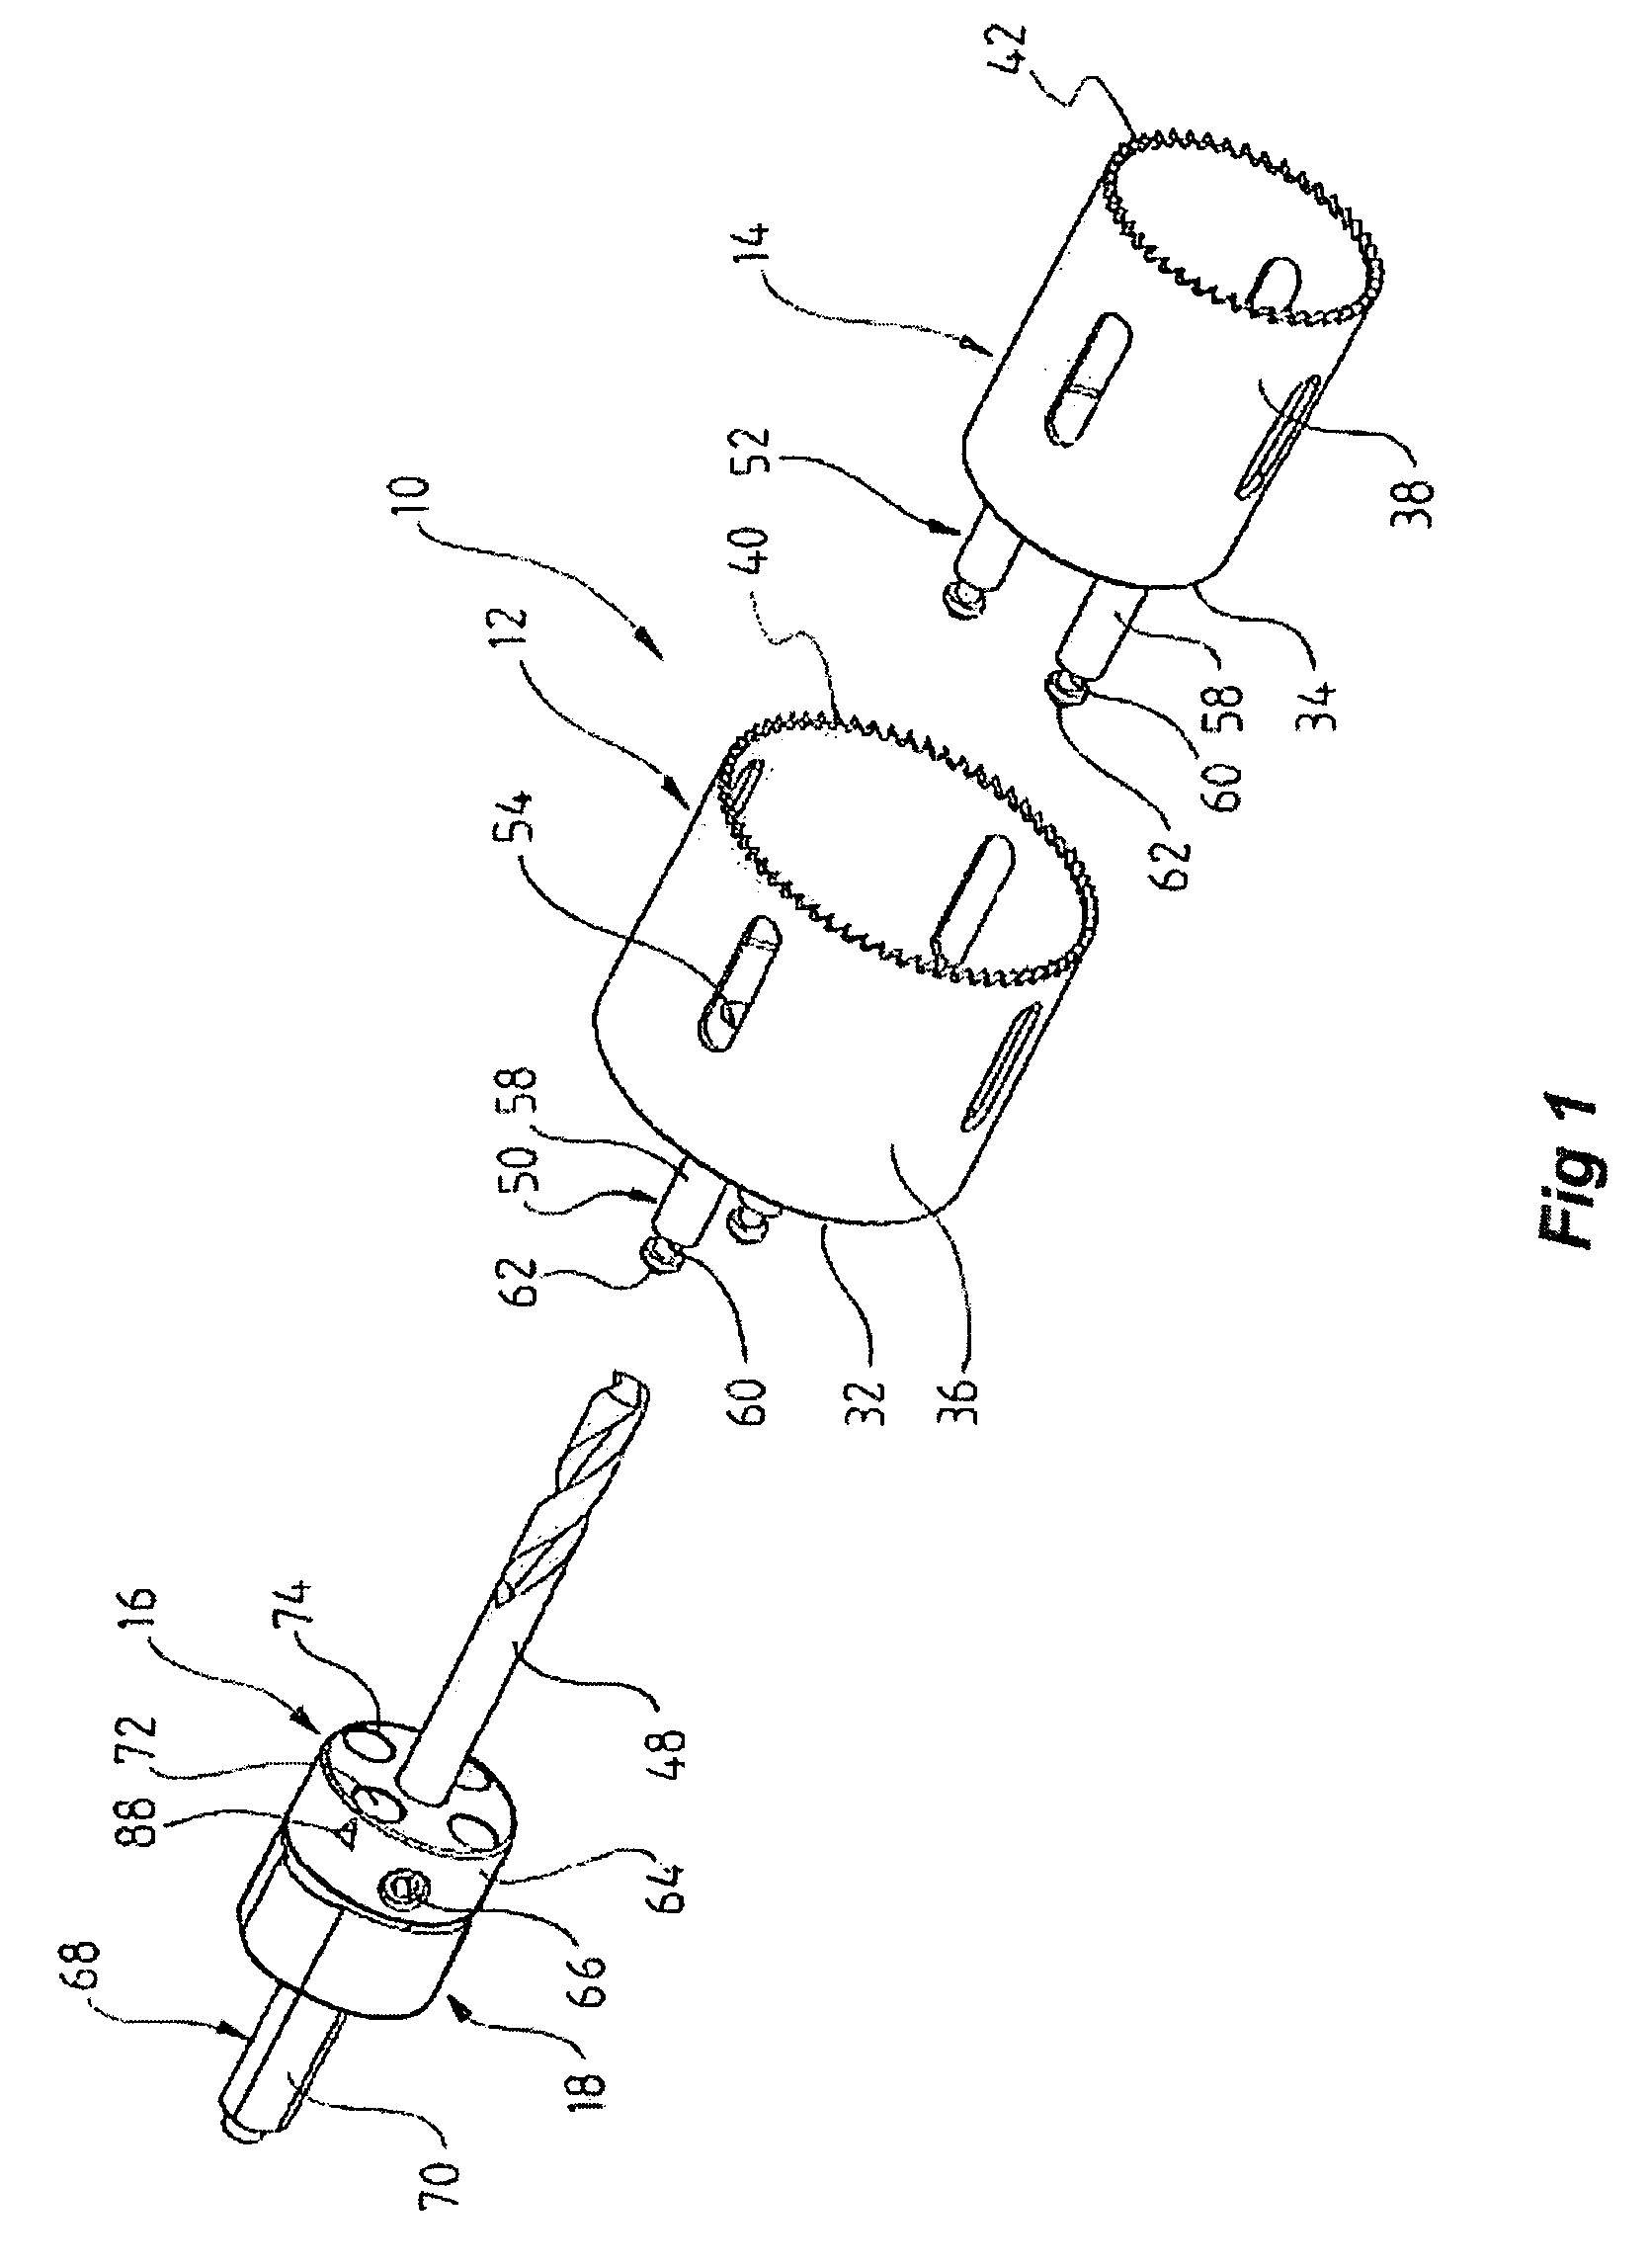 Hole-saw assembly including two hole-saws